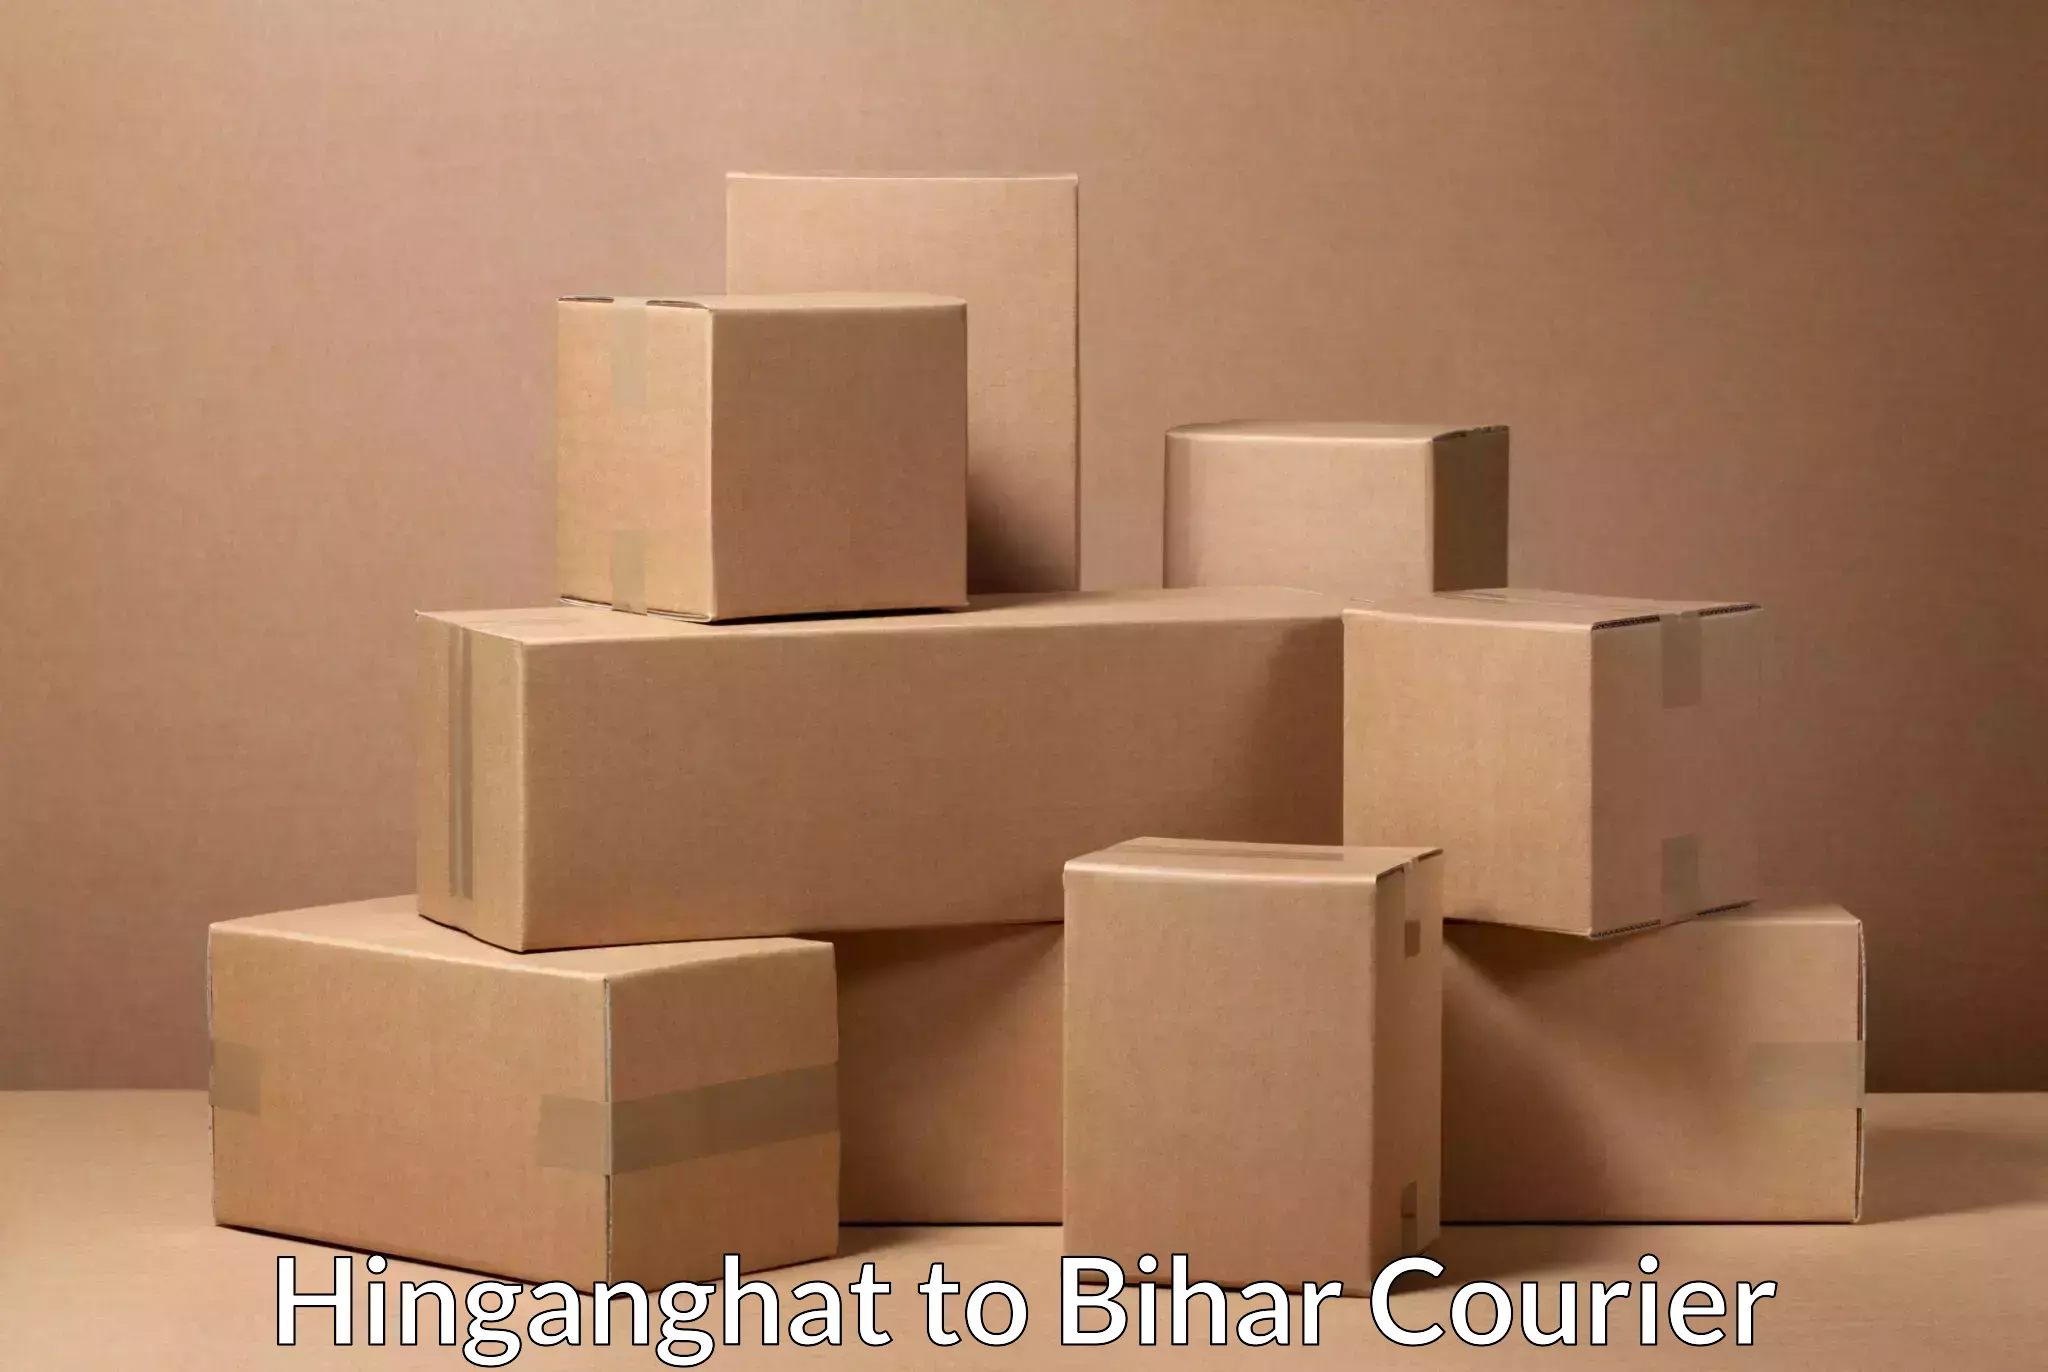 Cargo delivery service Hinganghat to Bihar